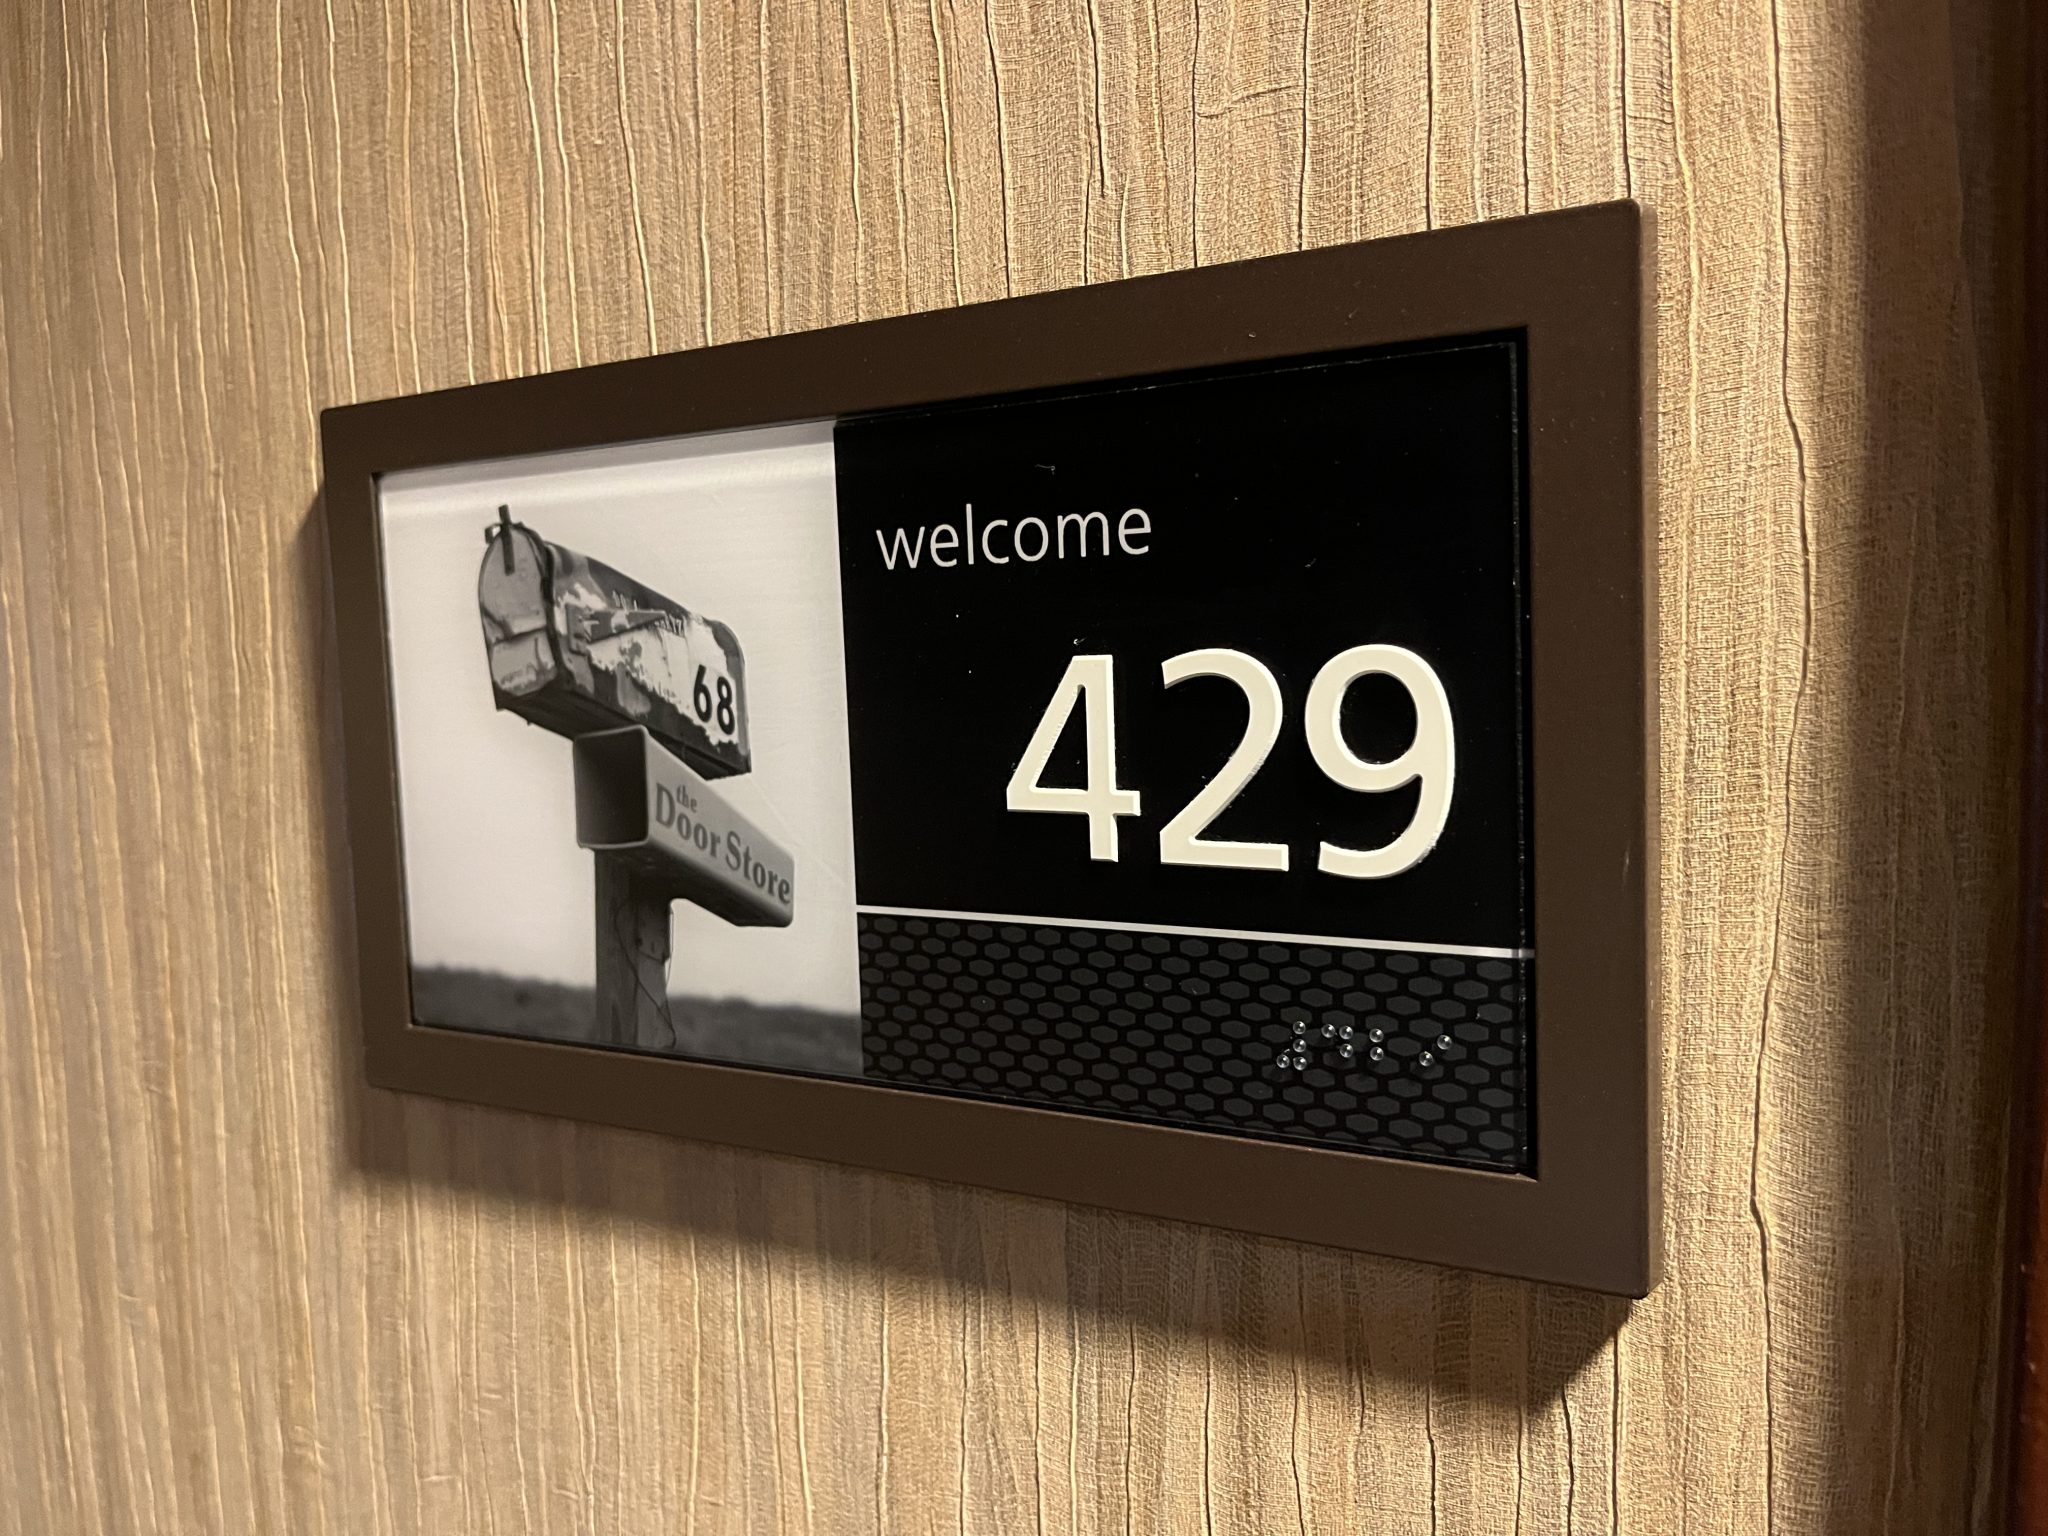 Hotel room door placard. It says Welcome at the top, then room 429. The number is written in braille right under the print, and to the left is a small picture of a mailbox to help people remember their room.